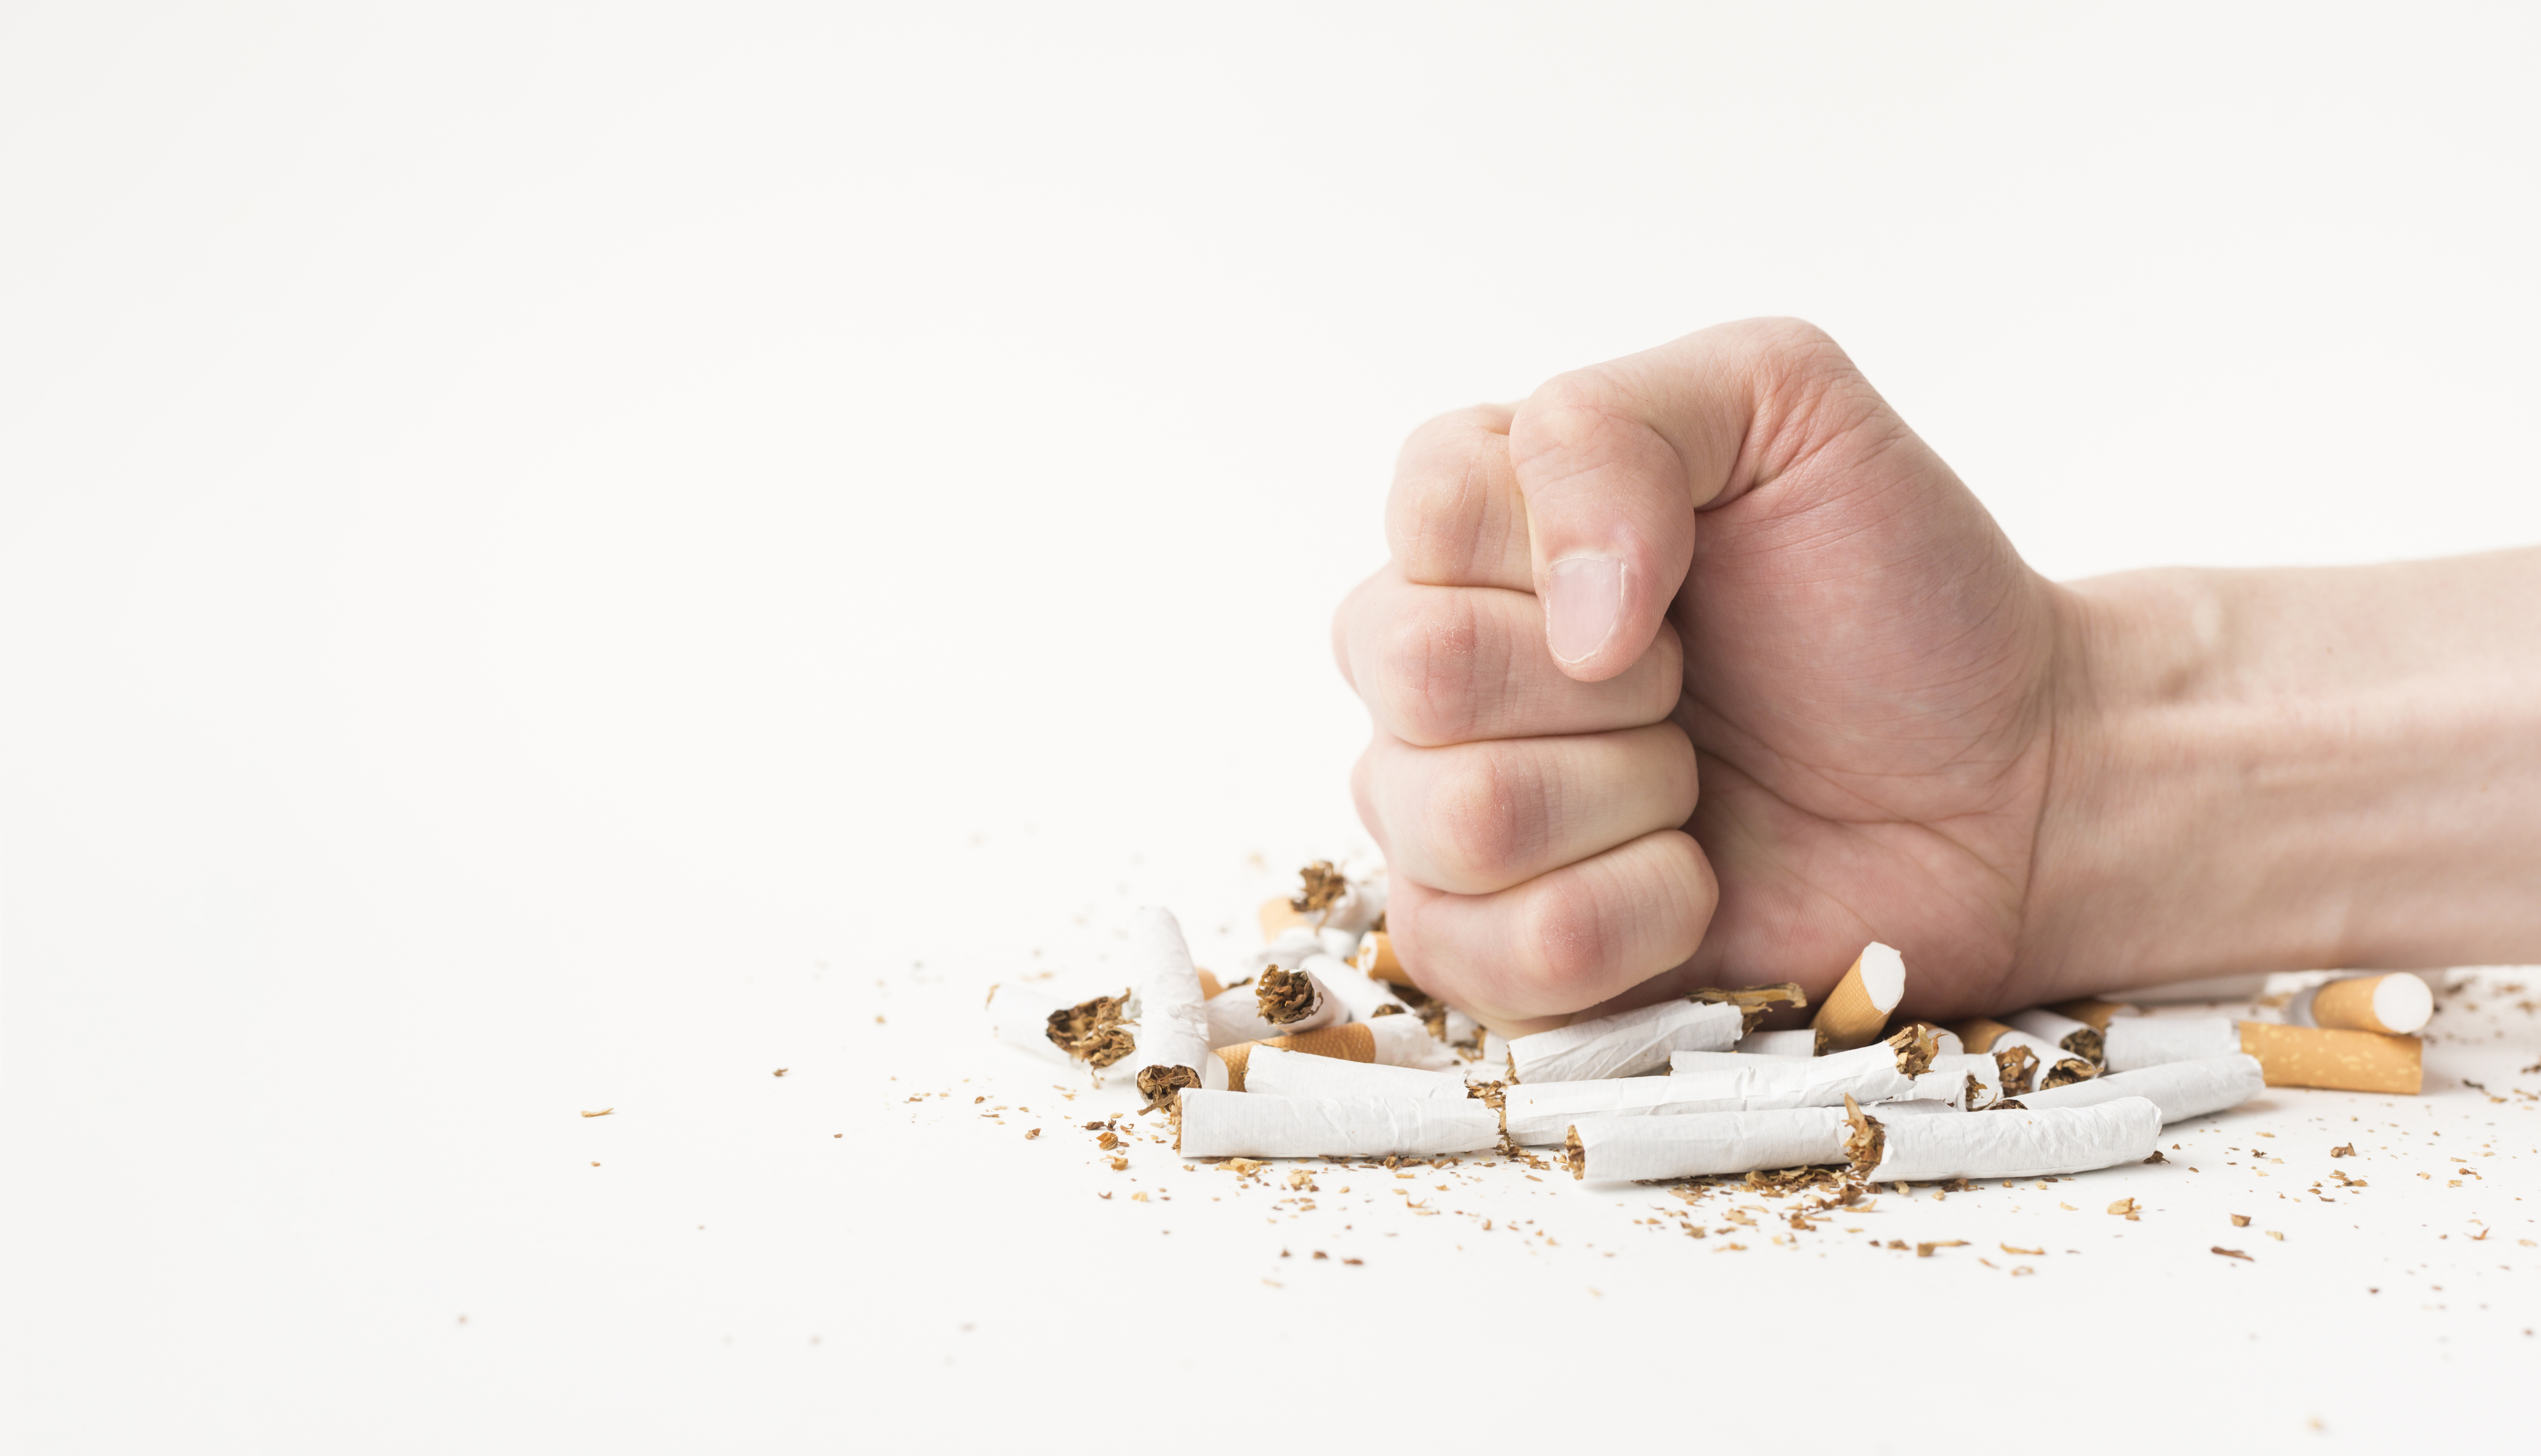 Hand stopping smoking hypnotherapy